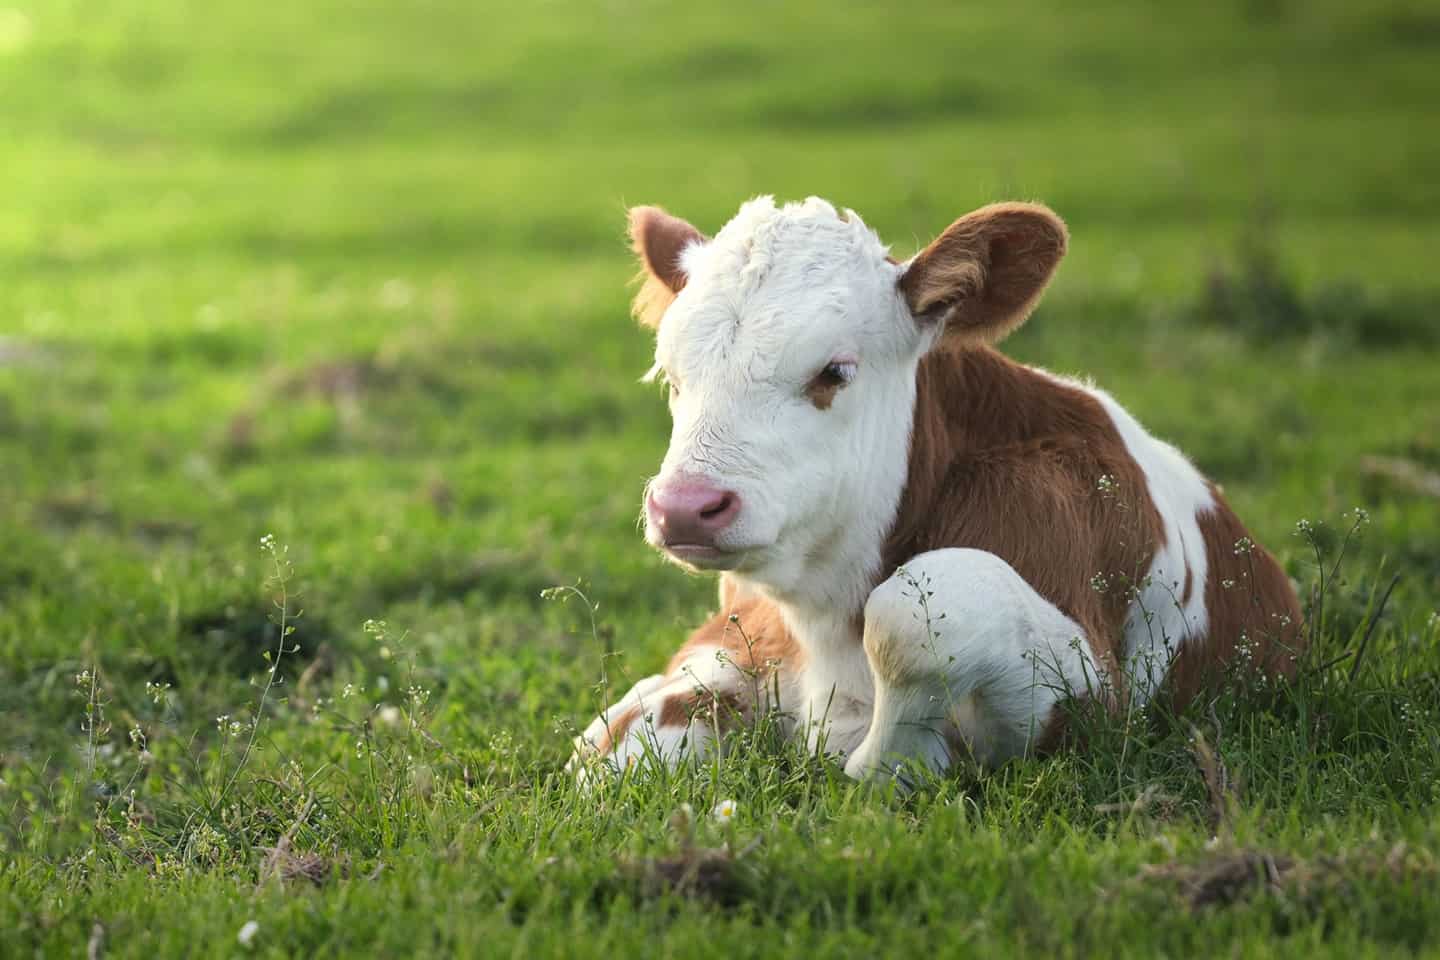 The Colostrum Counsel – Tips for keeping calves cool during the heat of the summer